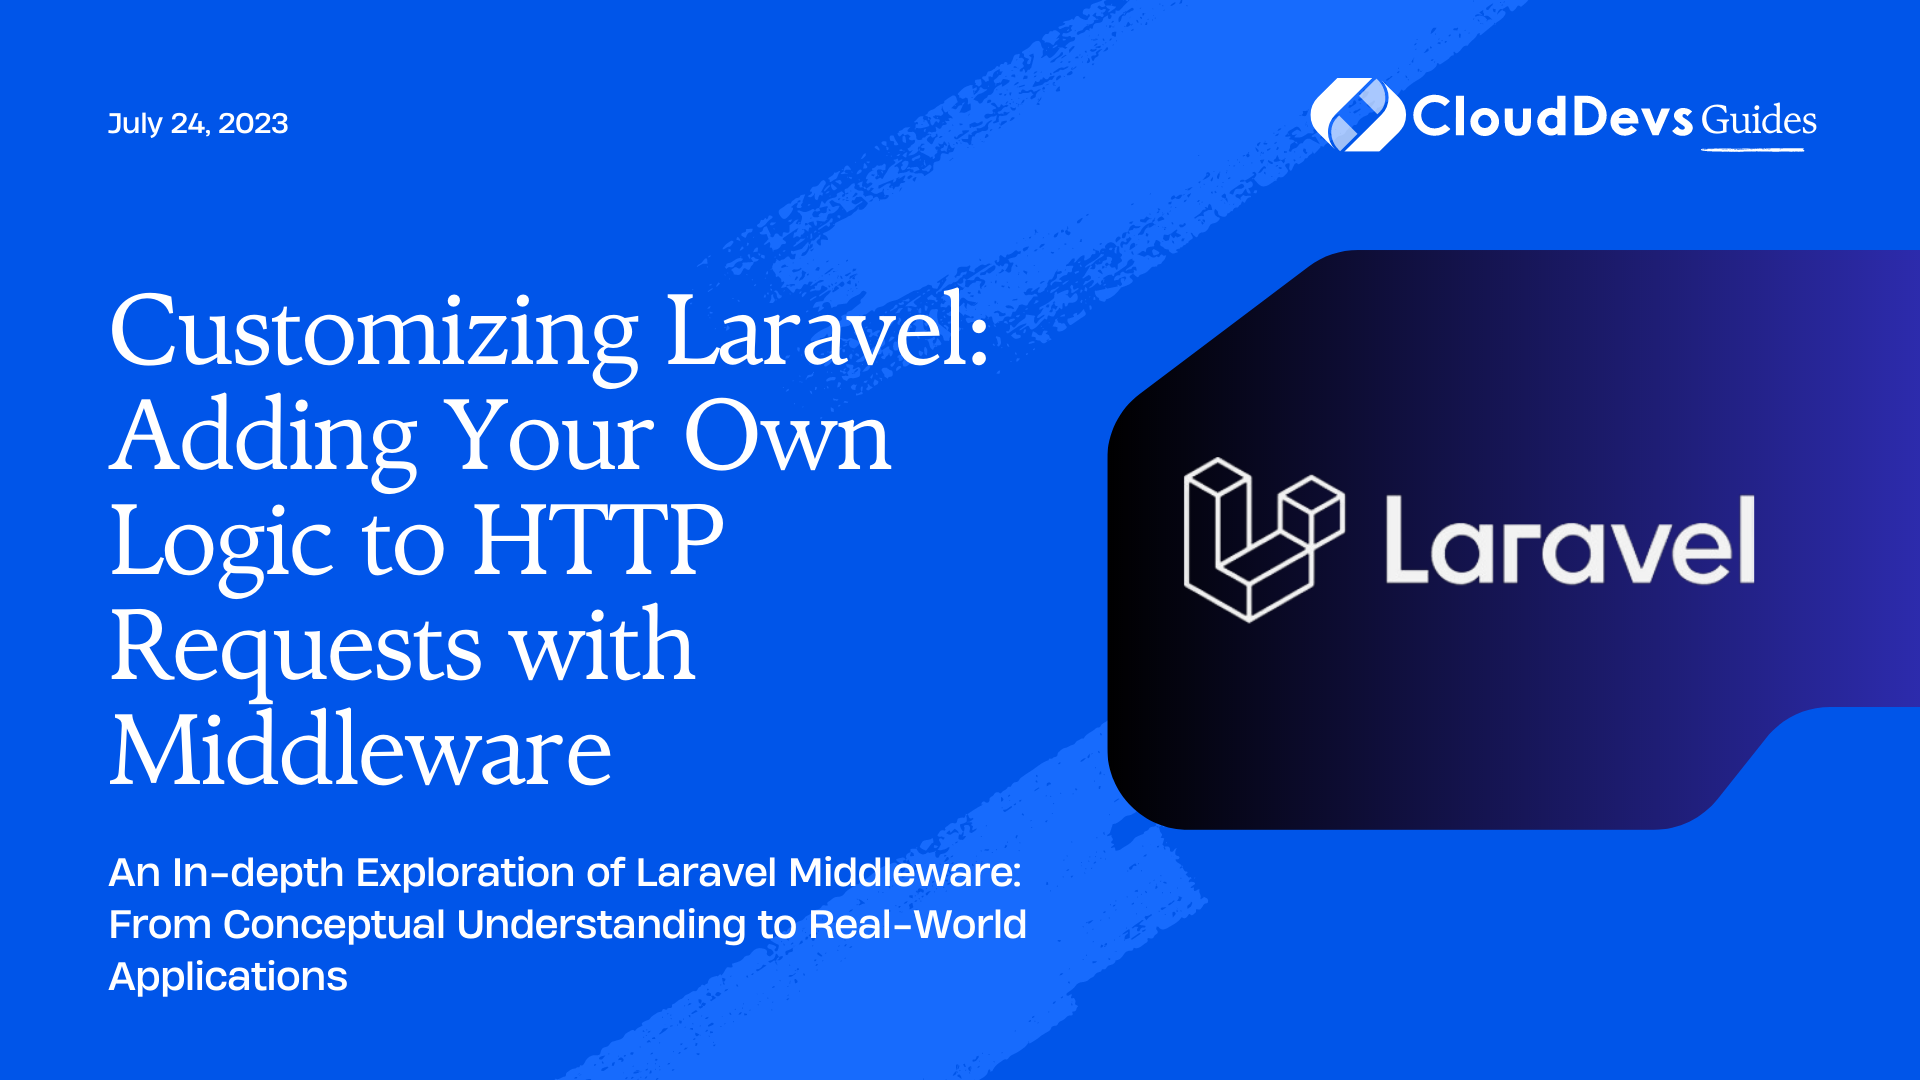 Customizing Laravel: Adding Your Own Logic to HTTP Requests with Middleware